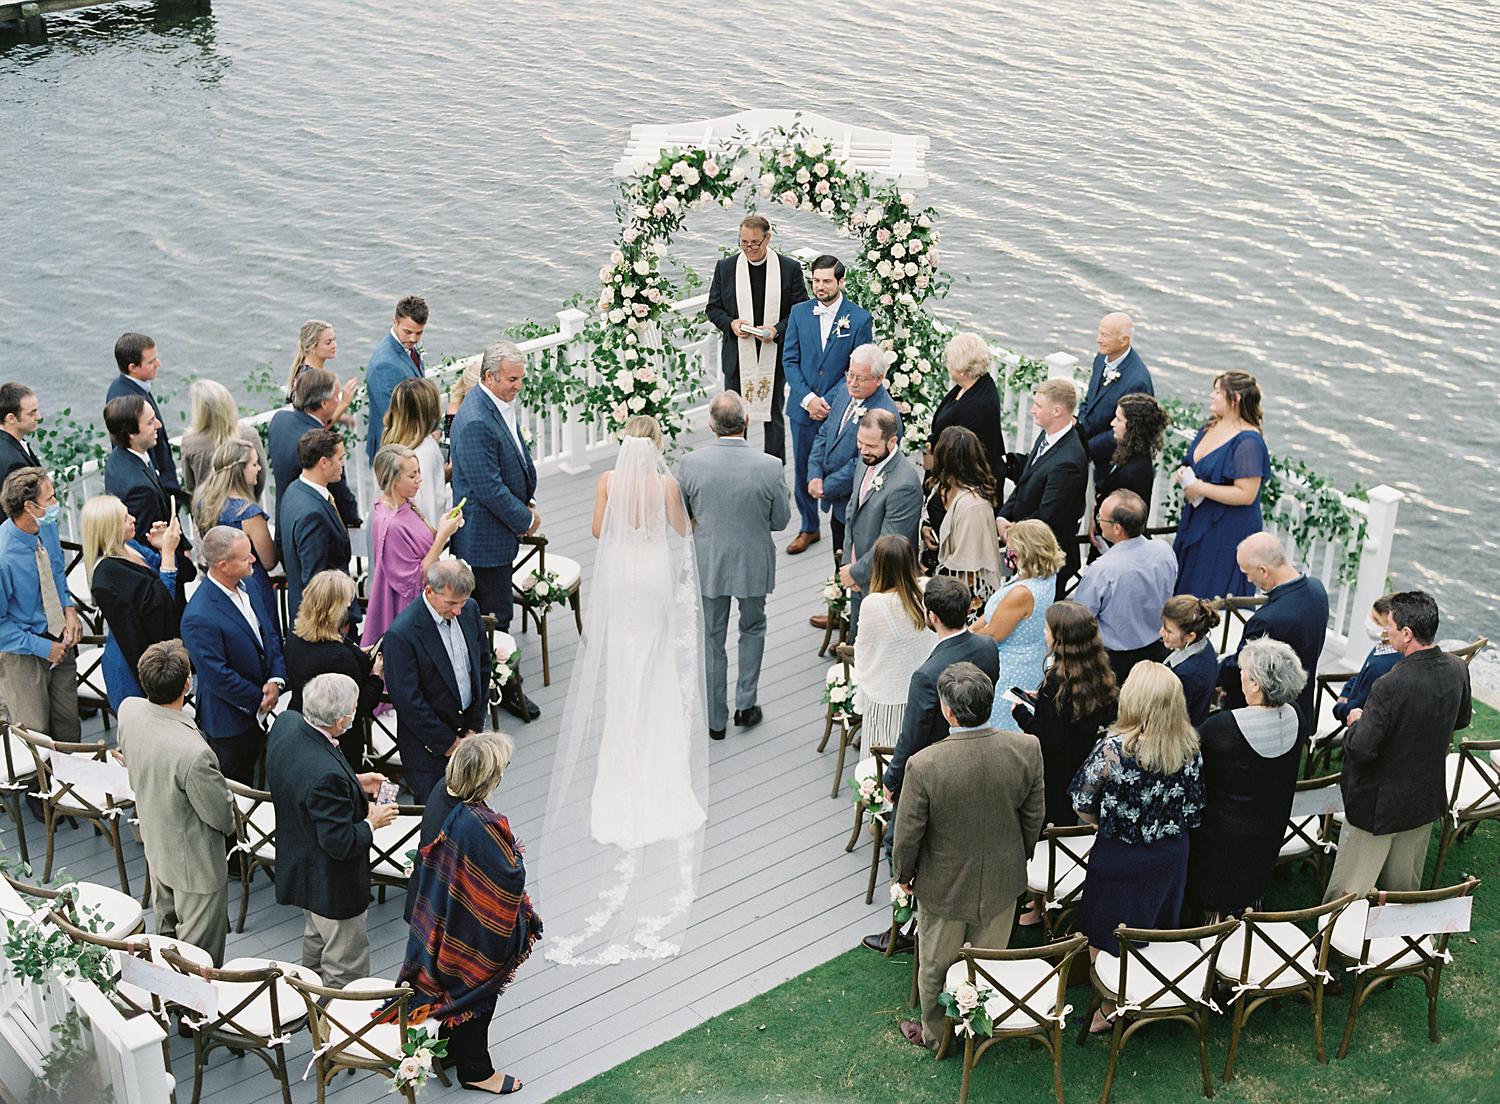 View from above of an intimate home wedding